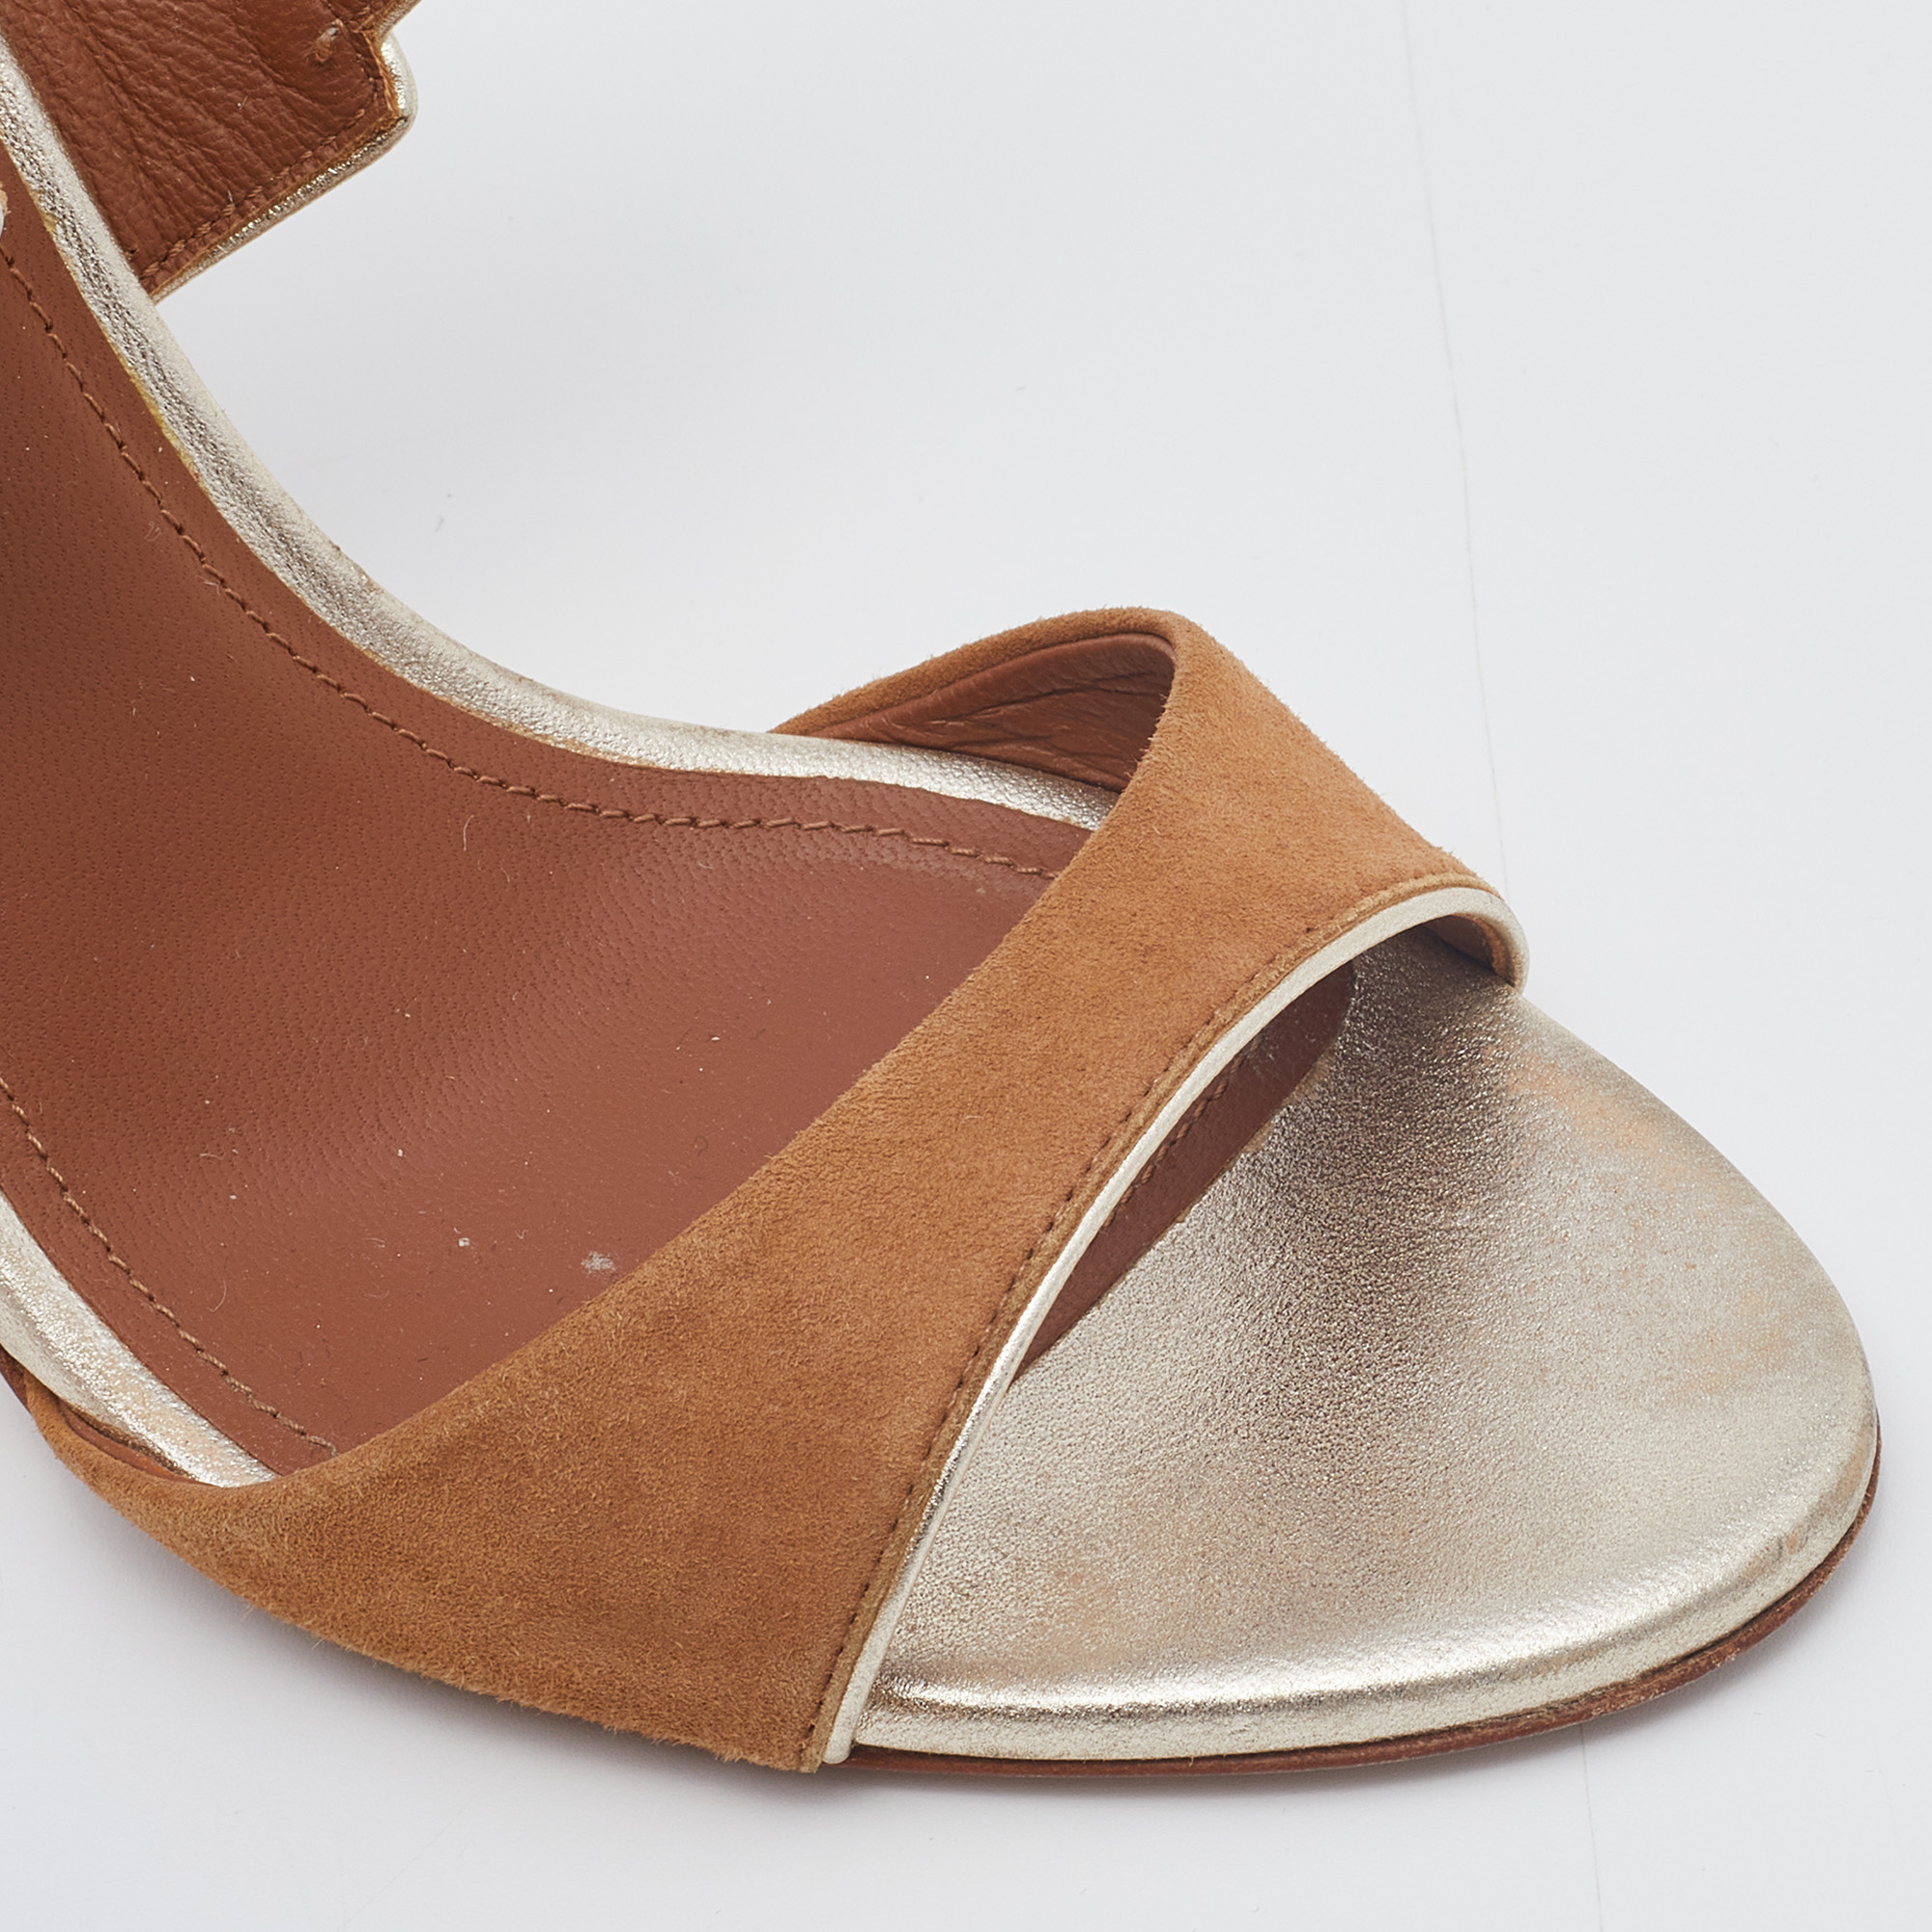 Malone Souliers Brown/Cream Leather And Suede Block Heel Ankle Strap Sandals Size 36